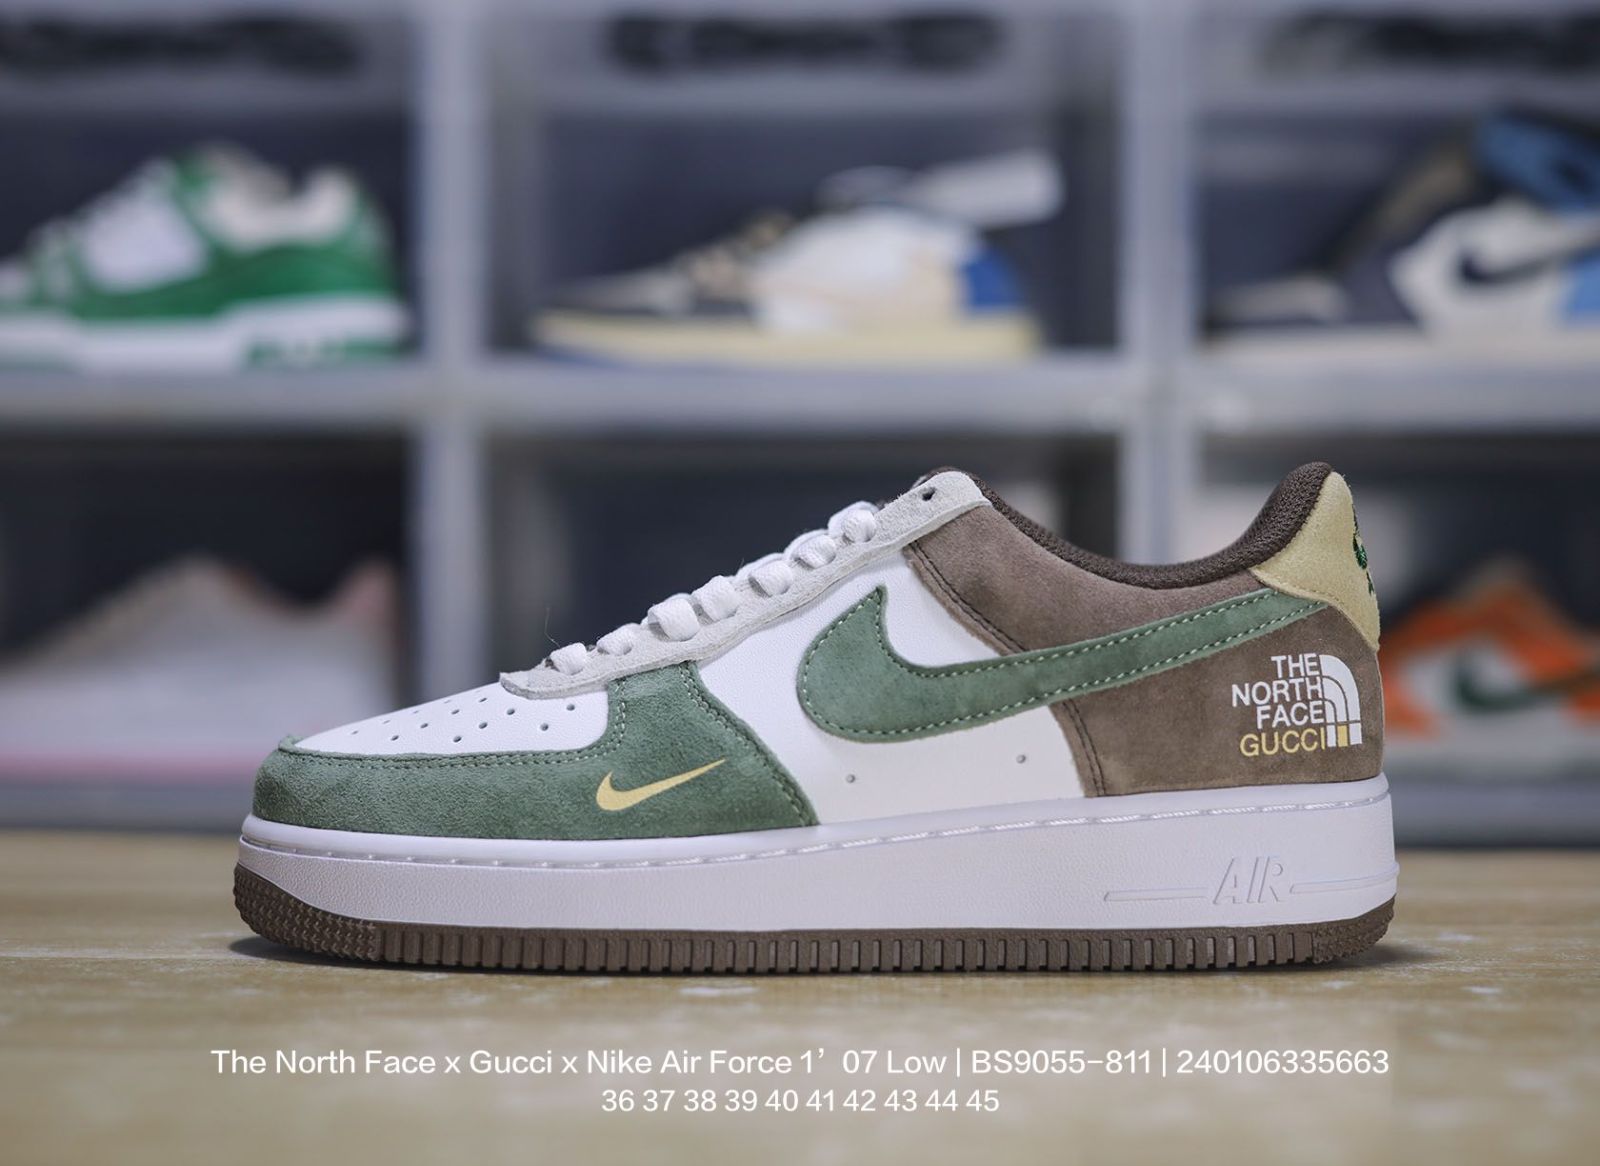 The North Face x Nike Air Force 1'07 Low ザノースフェイス ナイキ 